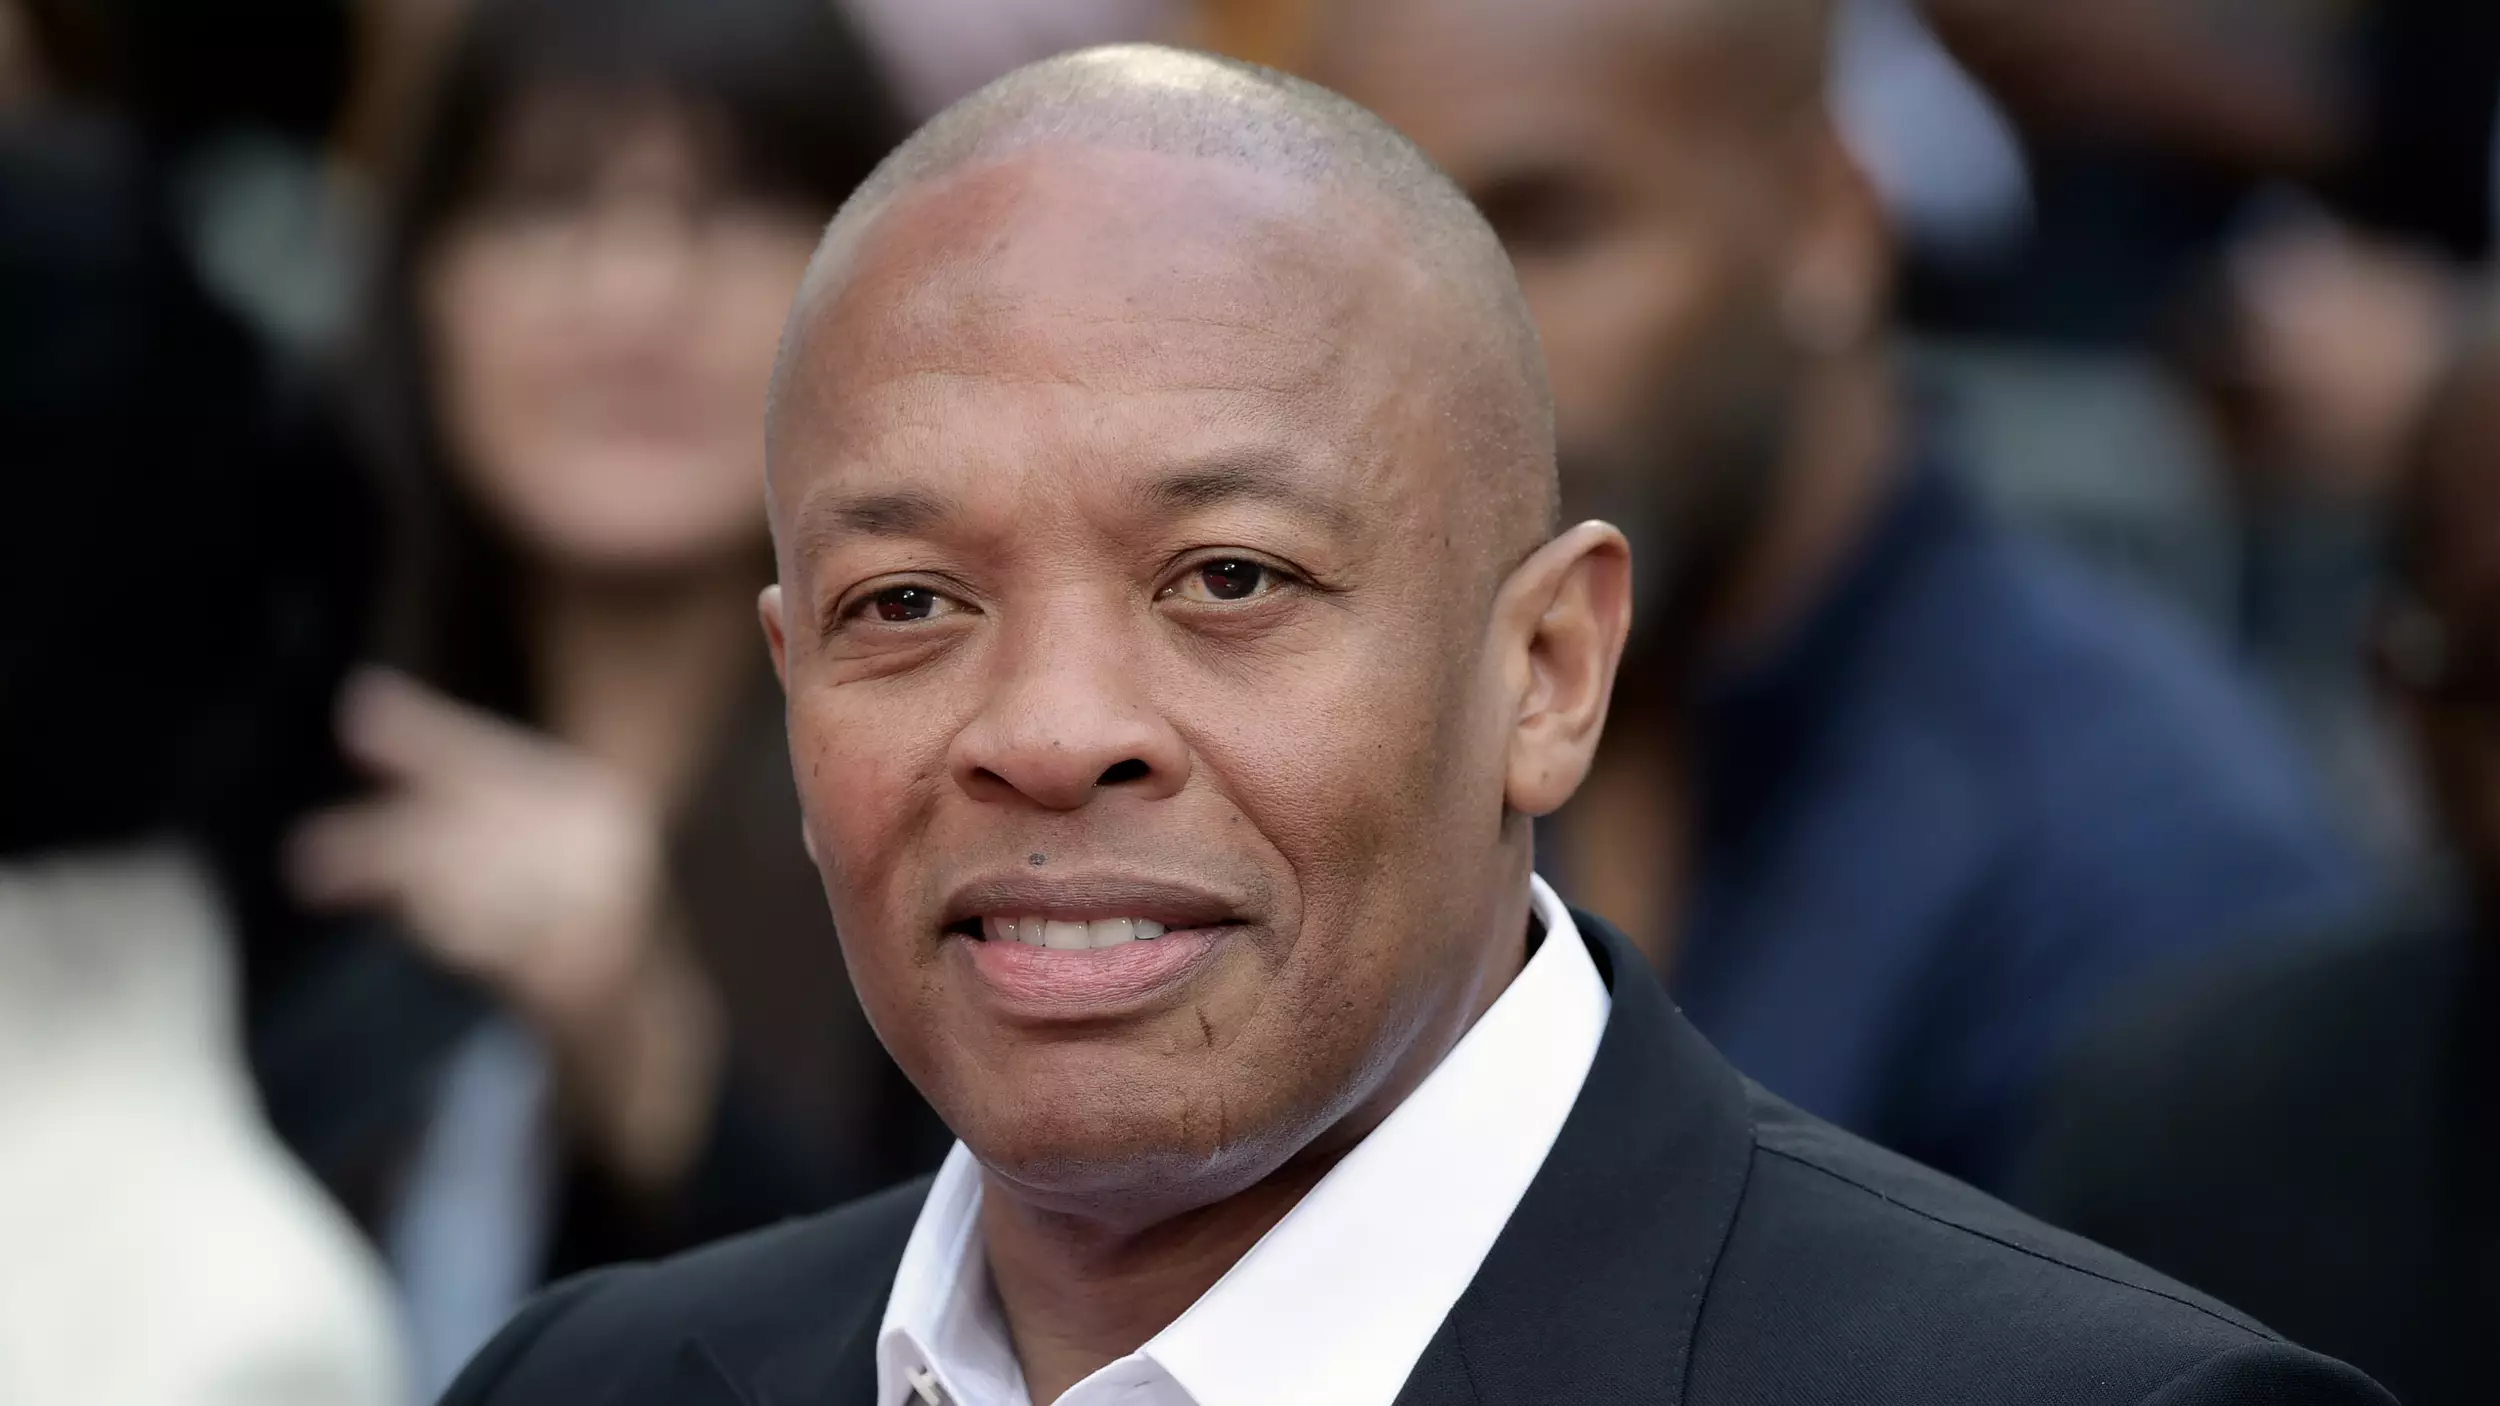 Dr Dre Says He's 'Doing Great' After Reported Brain Aneurysm